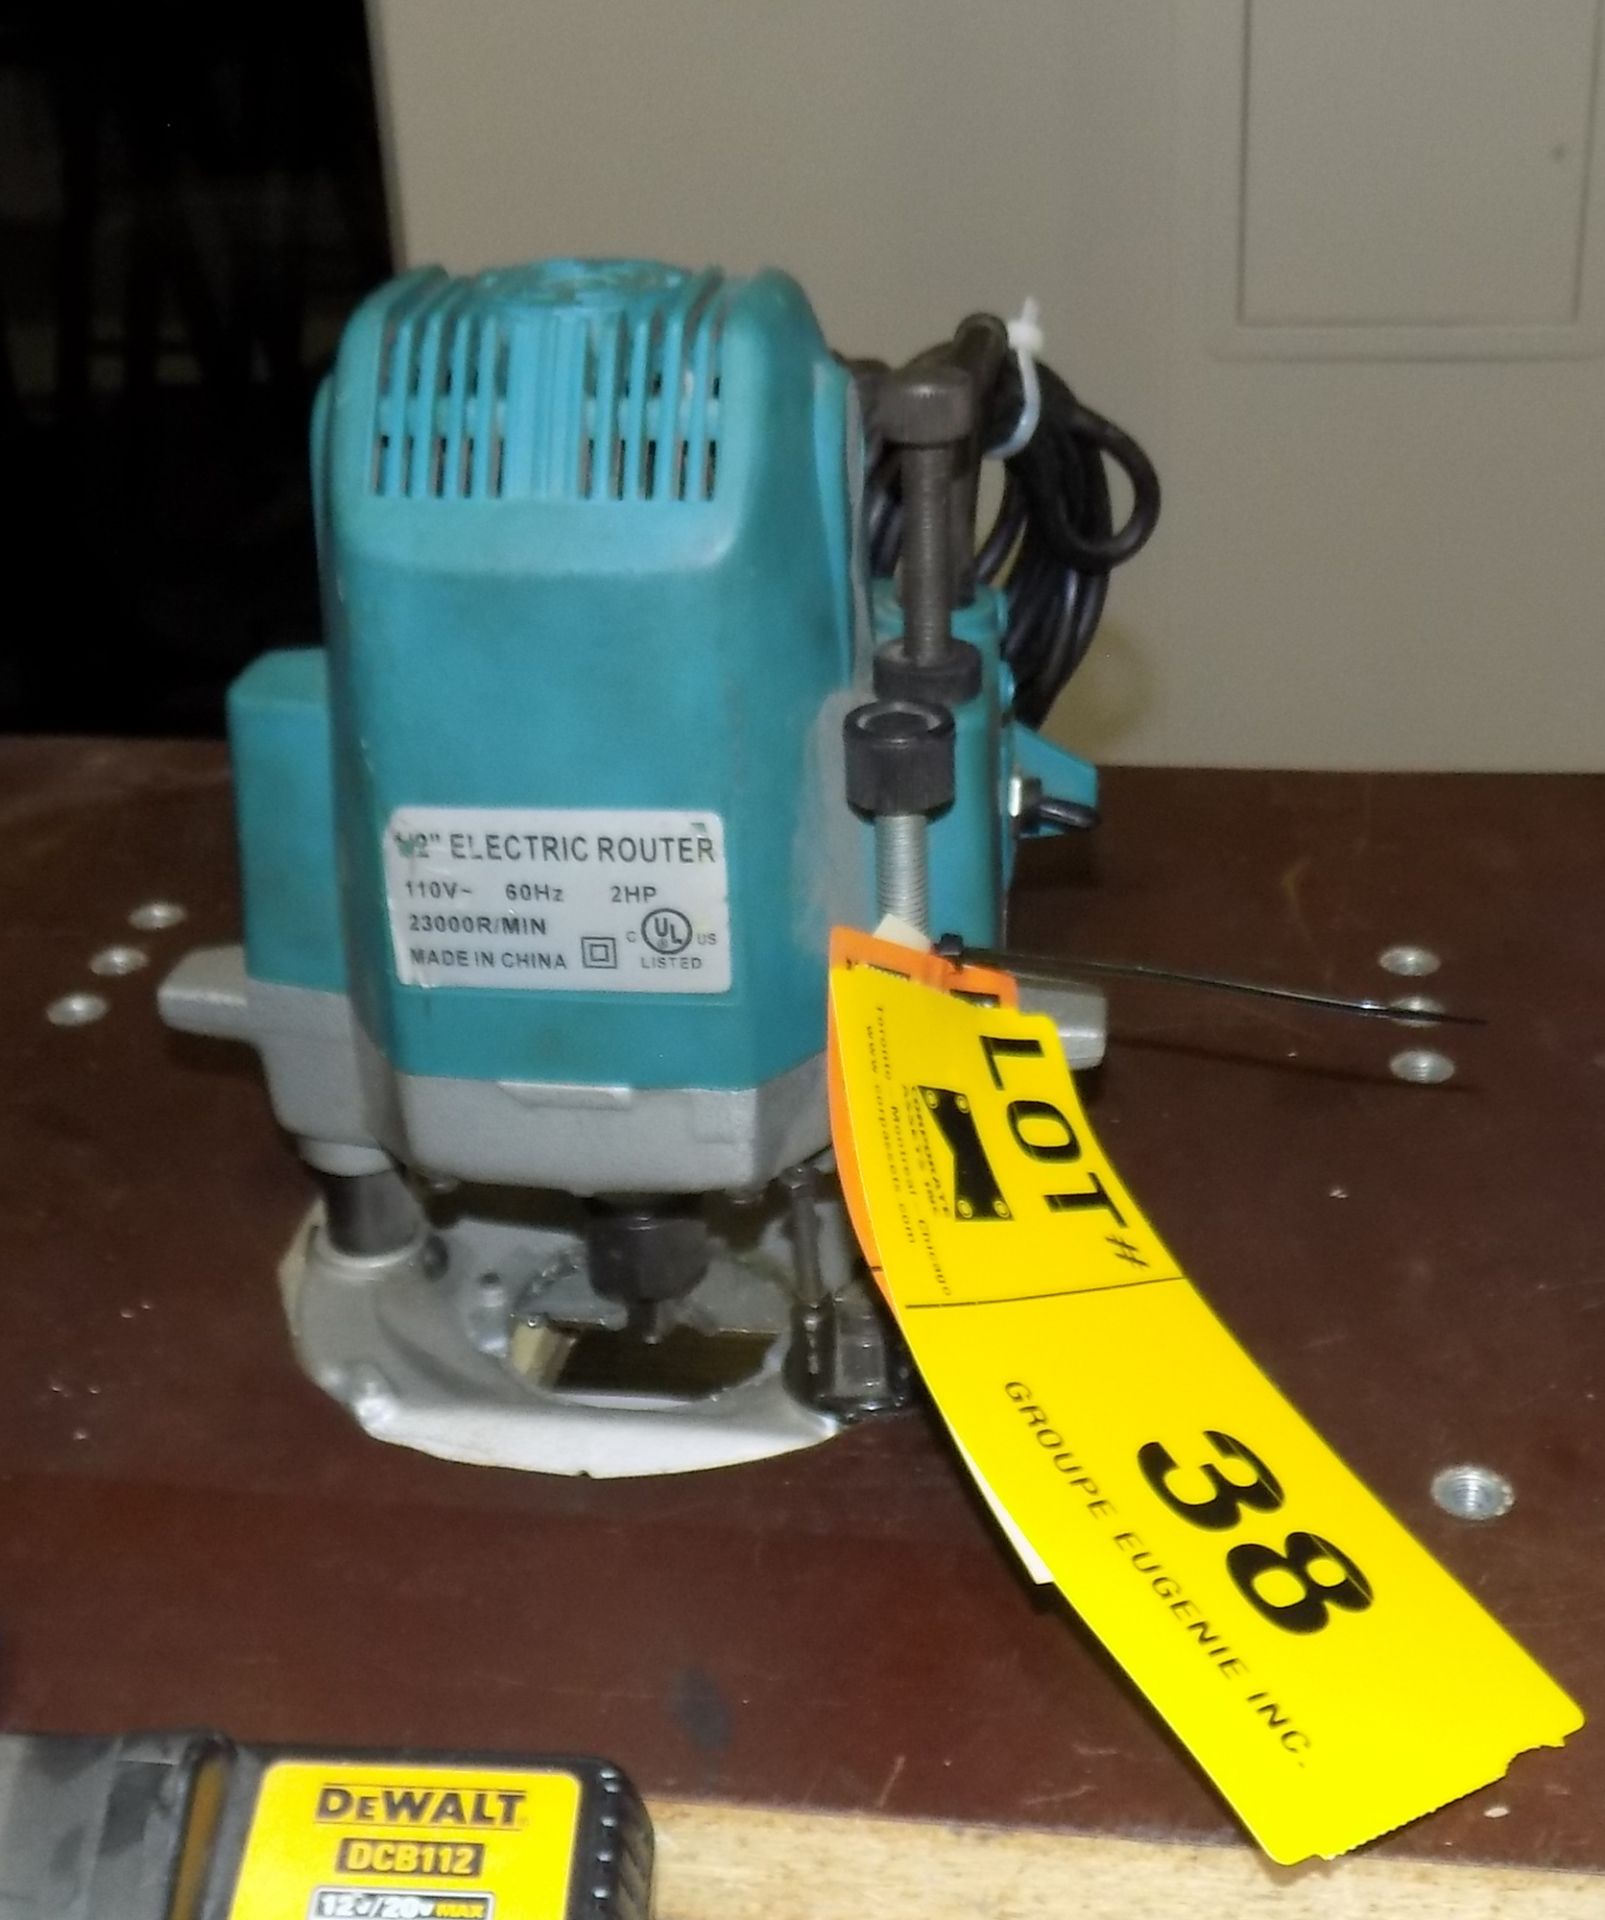 MAKITA PLUNGE ROUTER